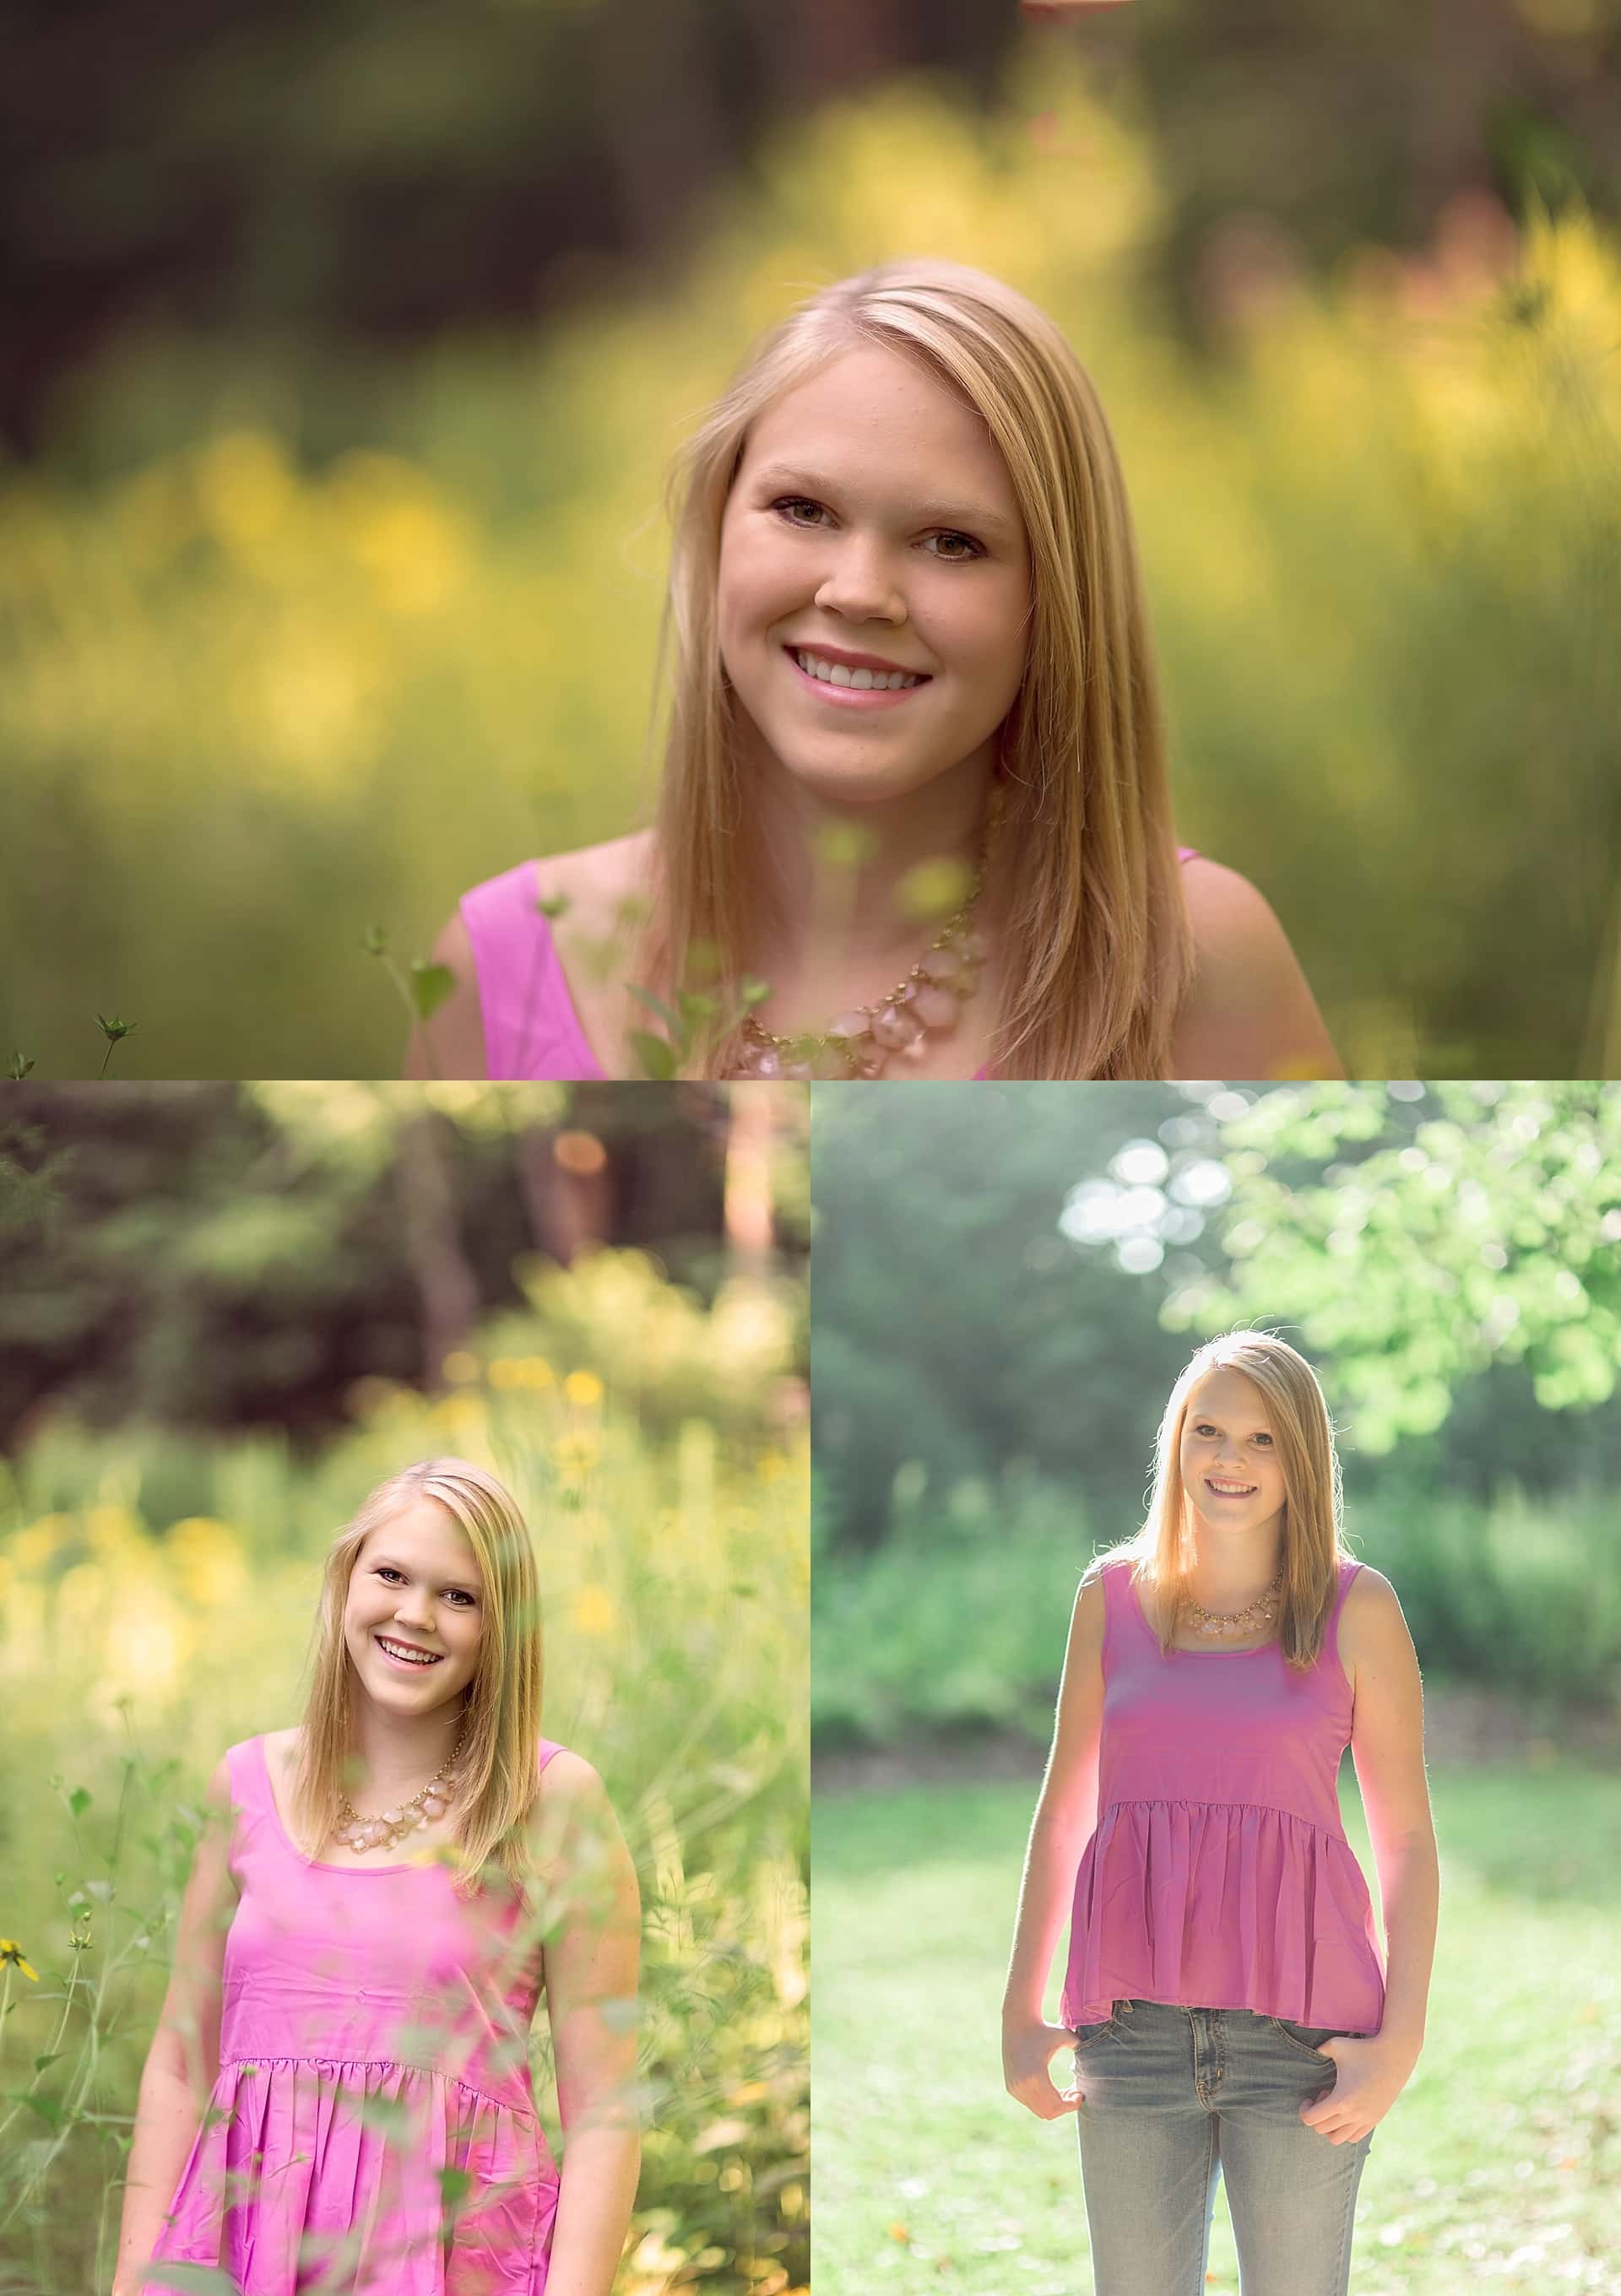 Headshot and 3/4 shot of teen girl in pink surrounded by greenery